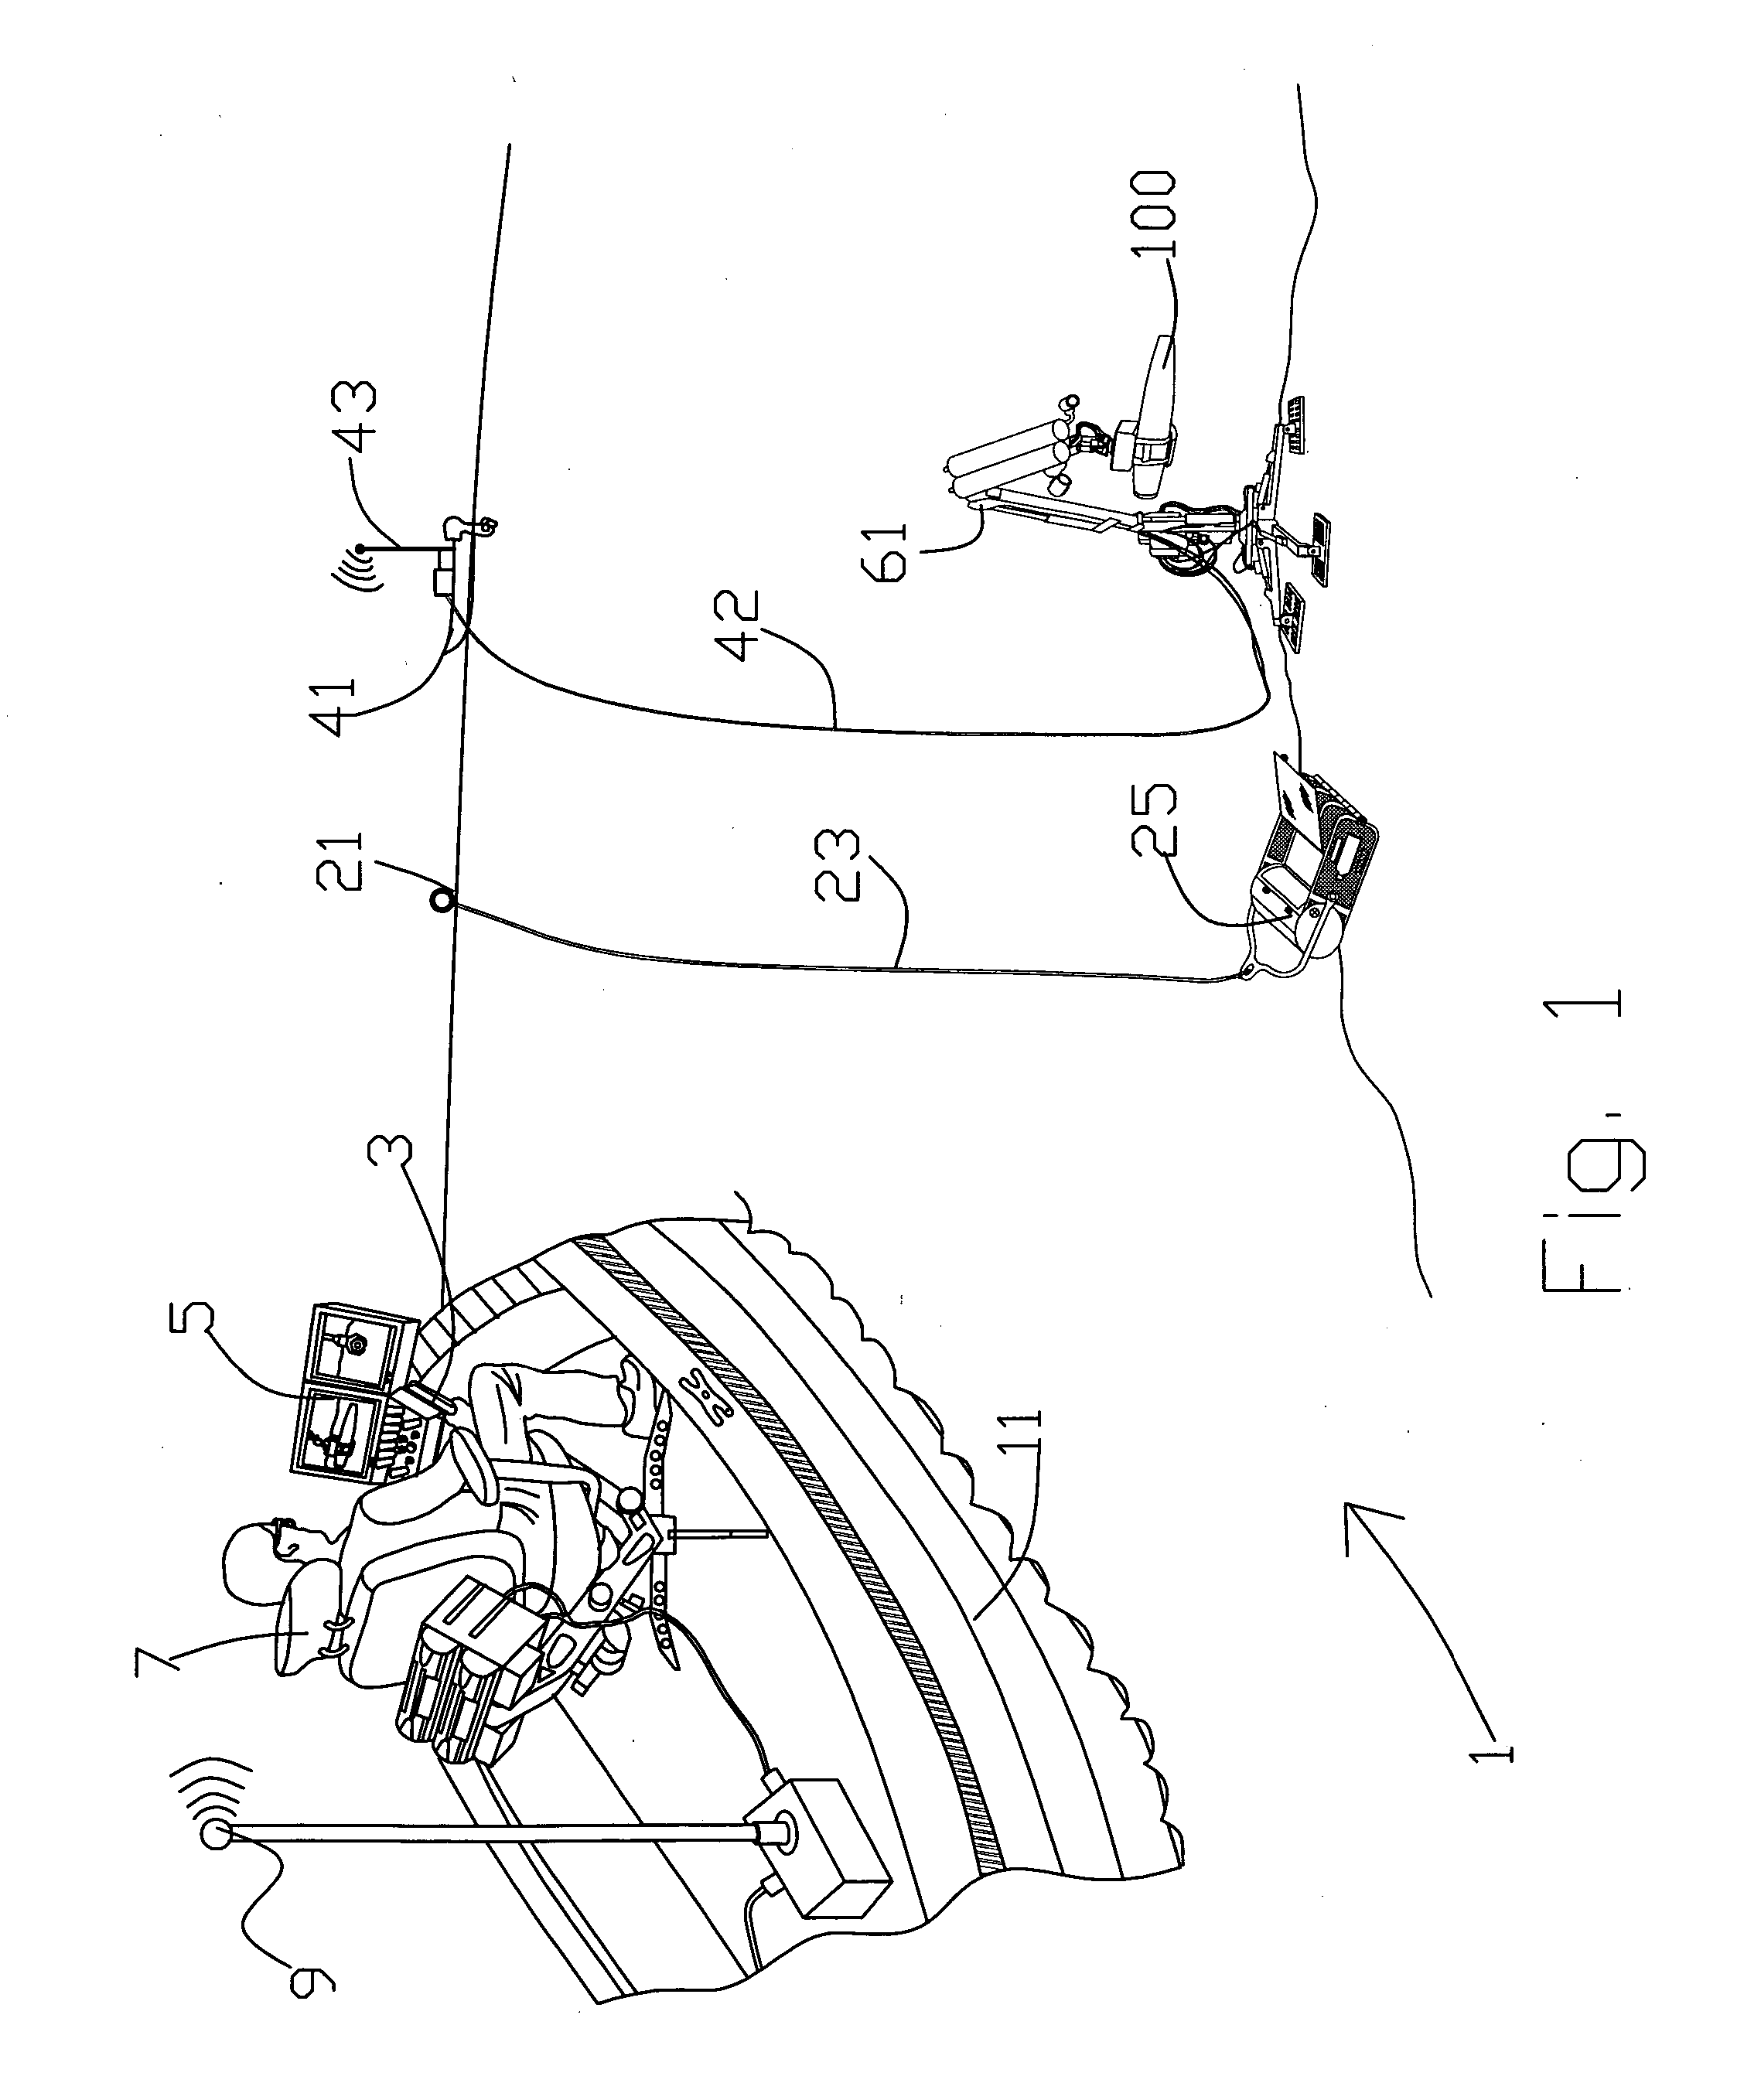 Remotely operated, underwater non-destructive ordnance recovery system and method